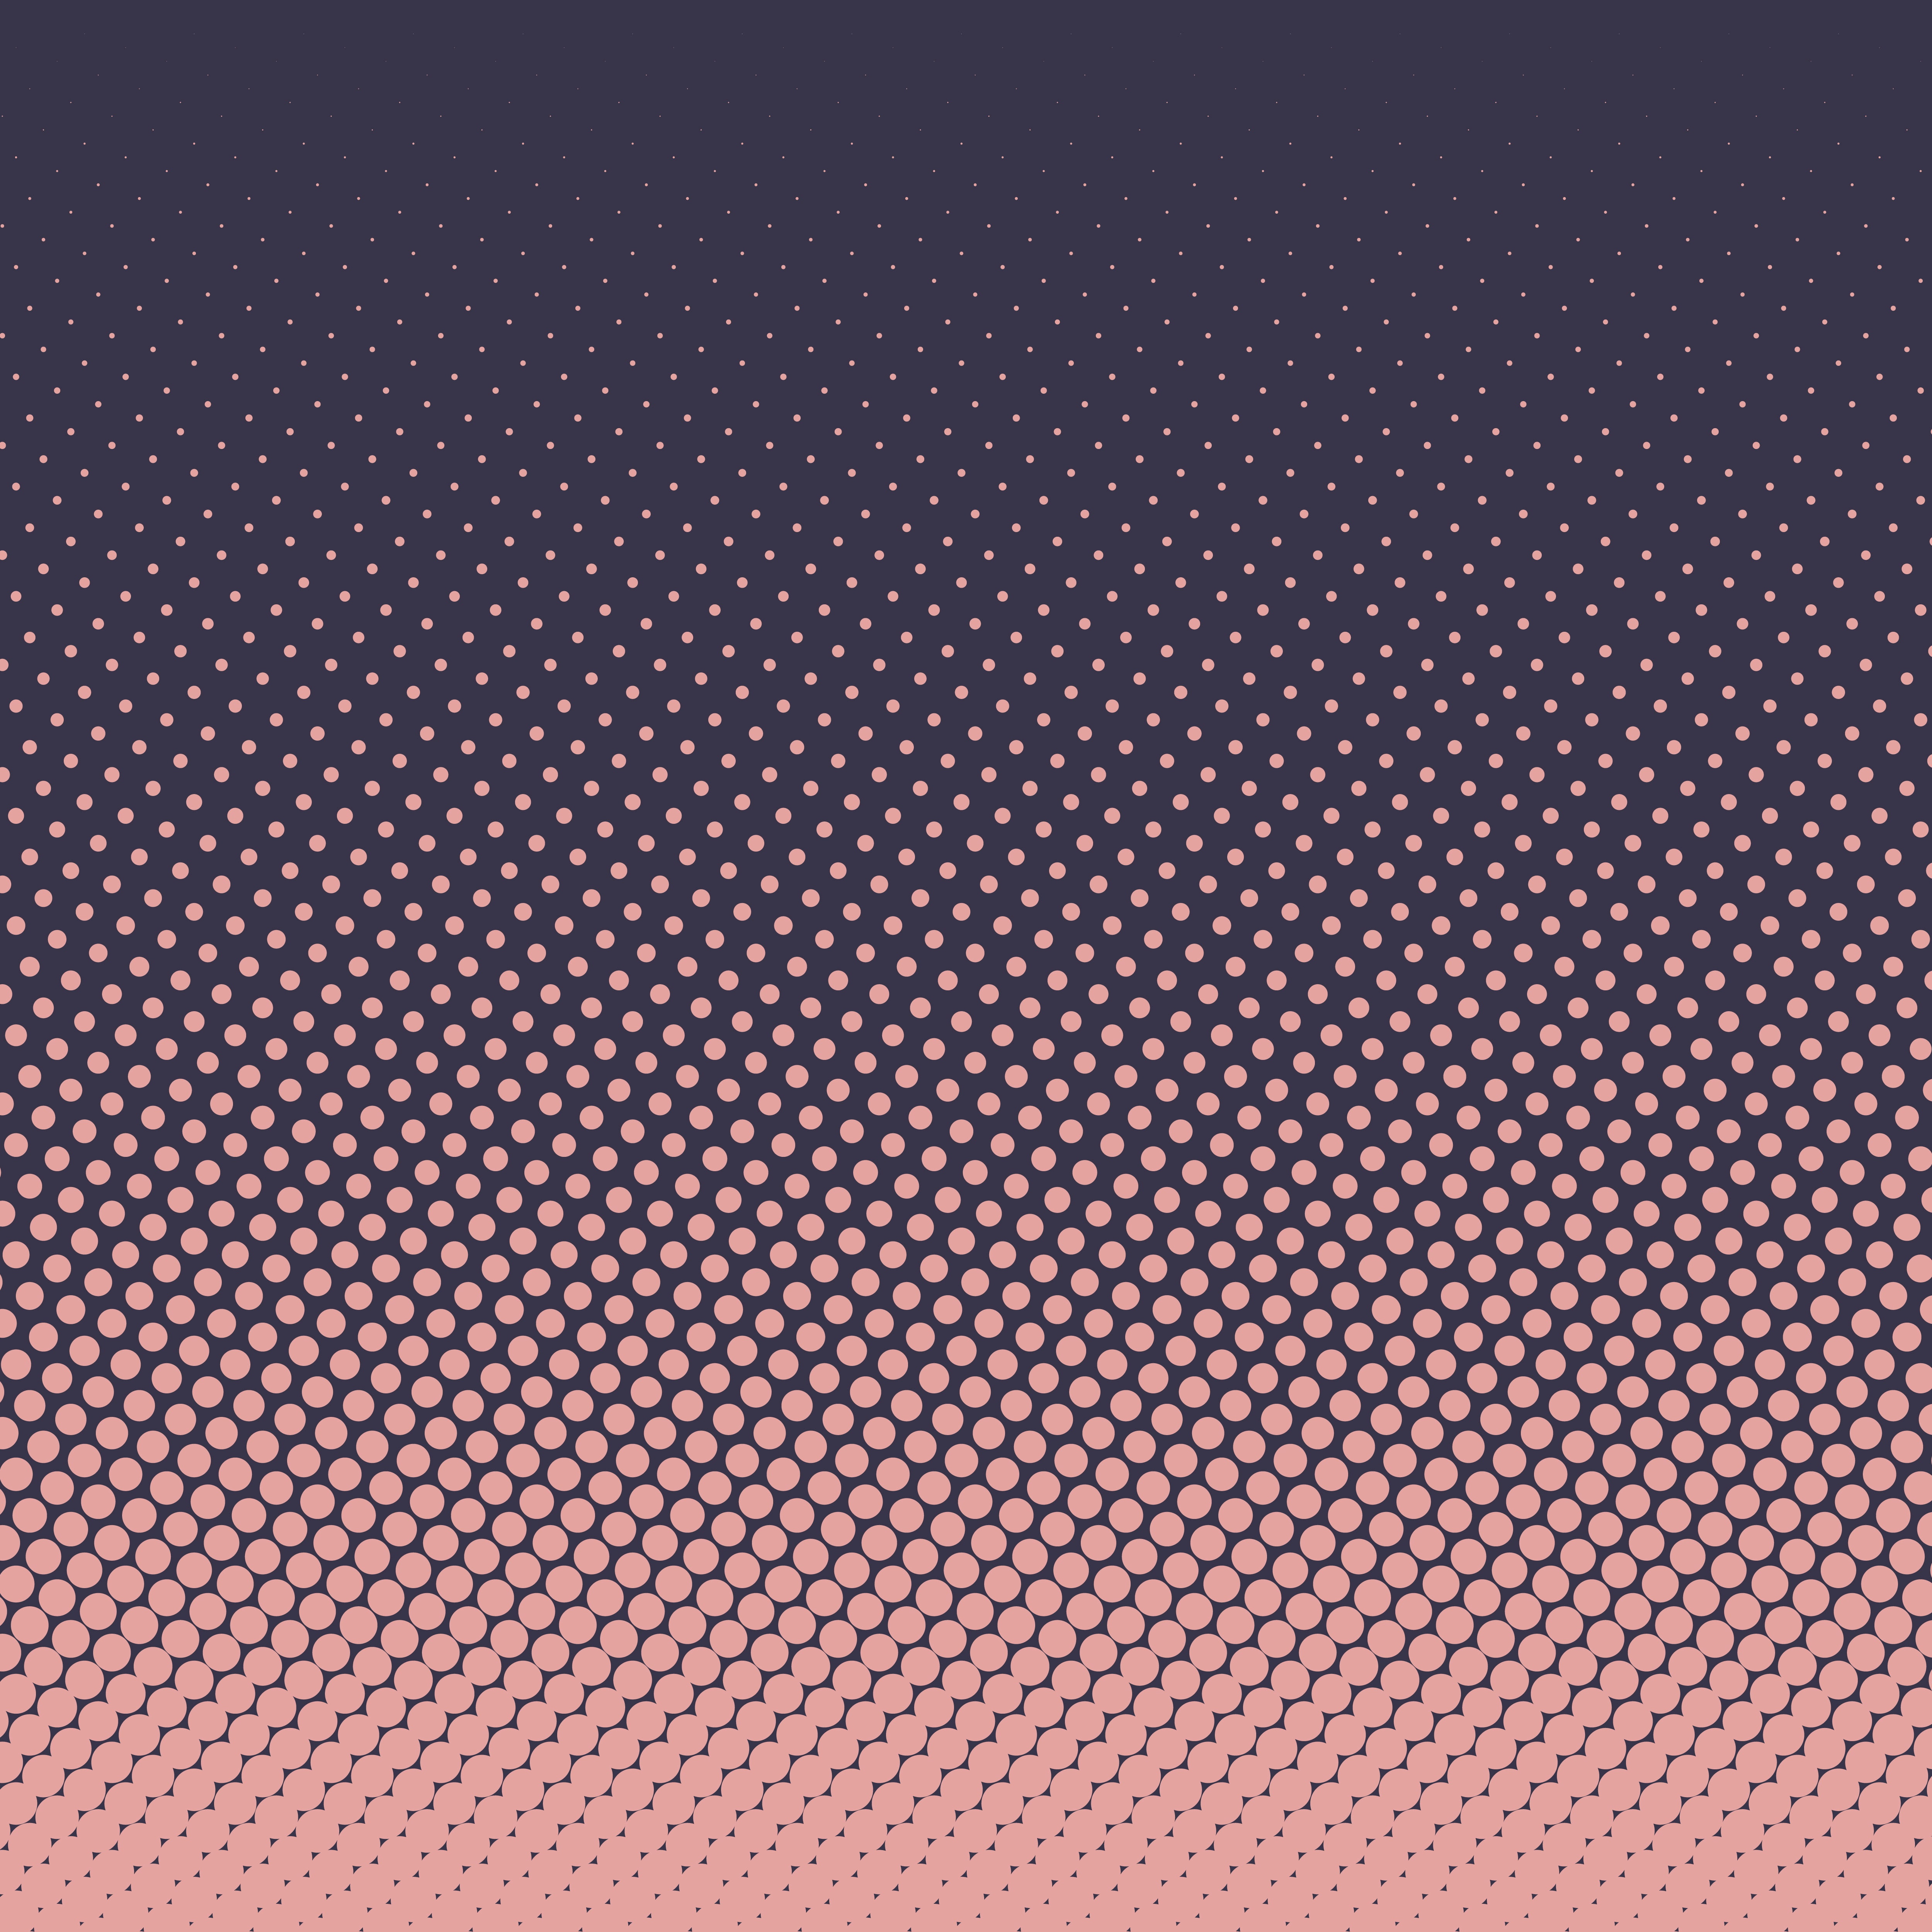 texture, simple, dots, abstract, backgrounds, pattern, full frame